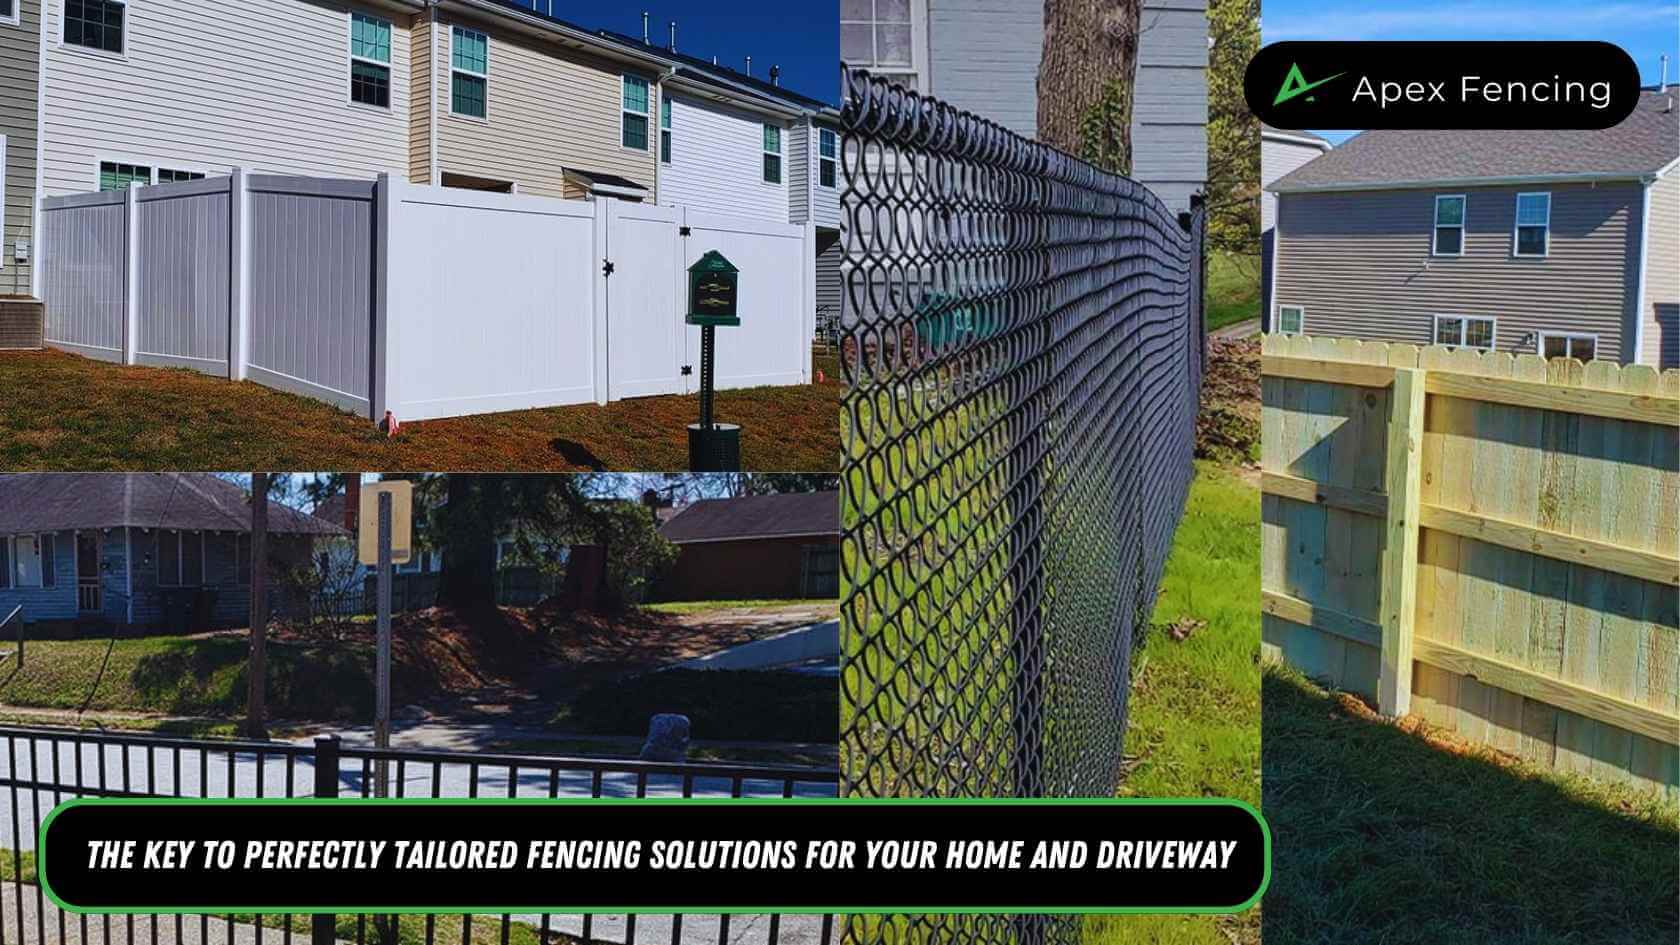 Aberdeen, NC Fence Contractor Expertise: The Key to Perfectly Tailored Fencing Solutions for Your Home and Driveway